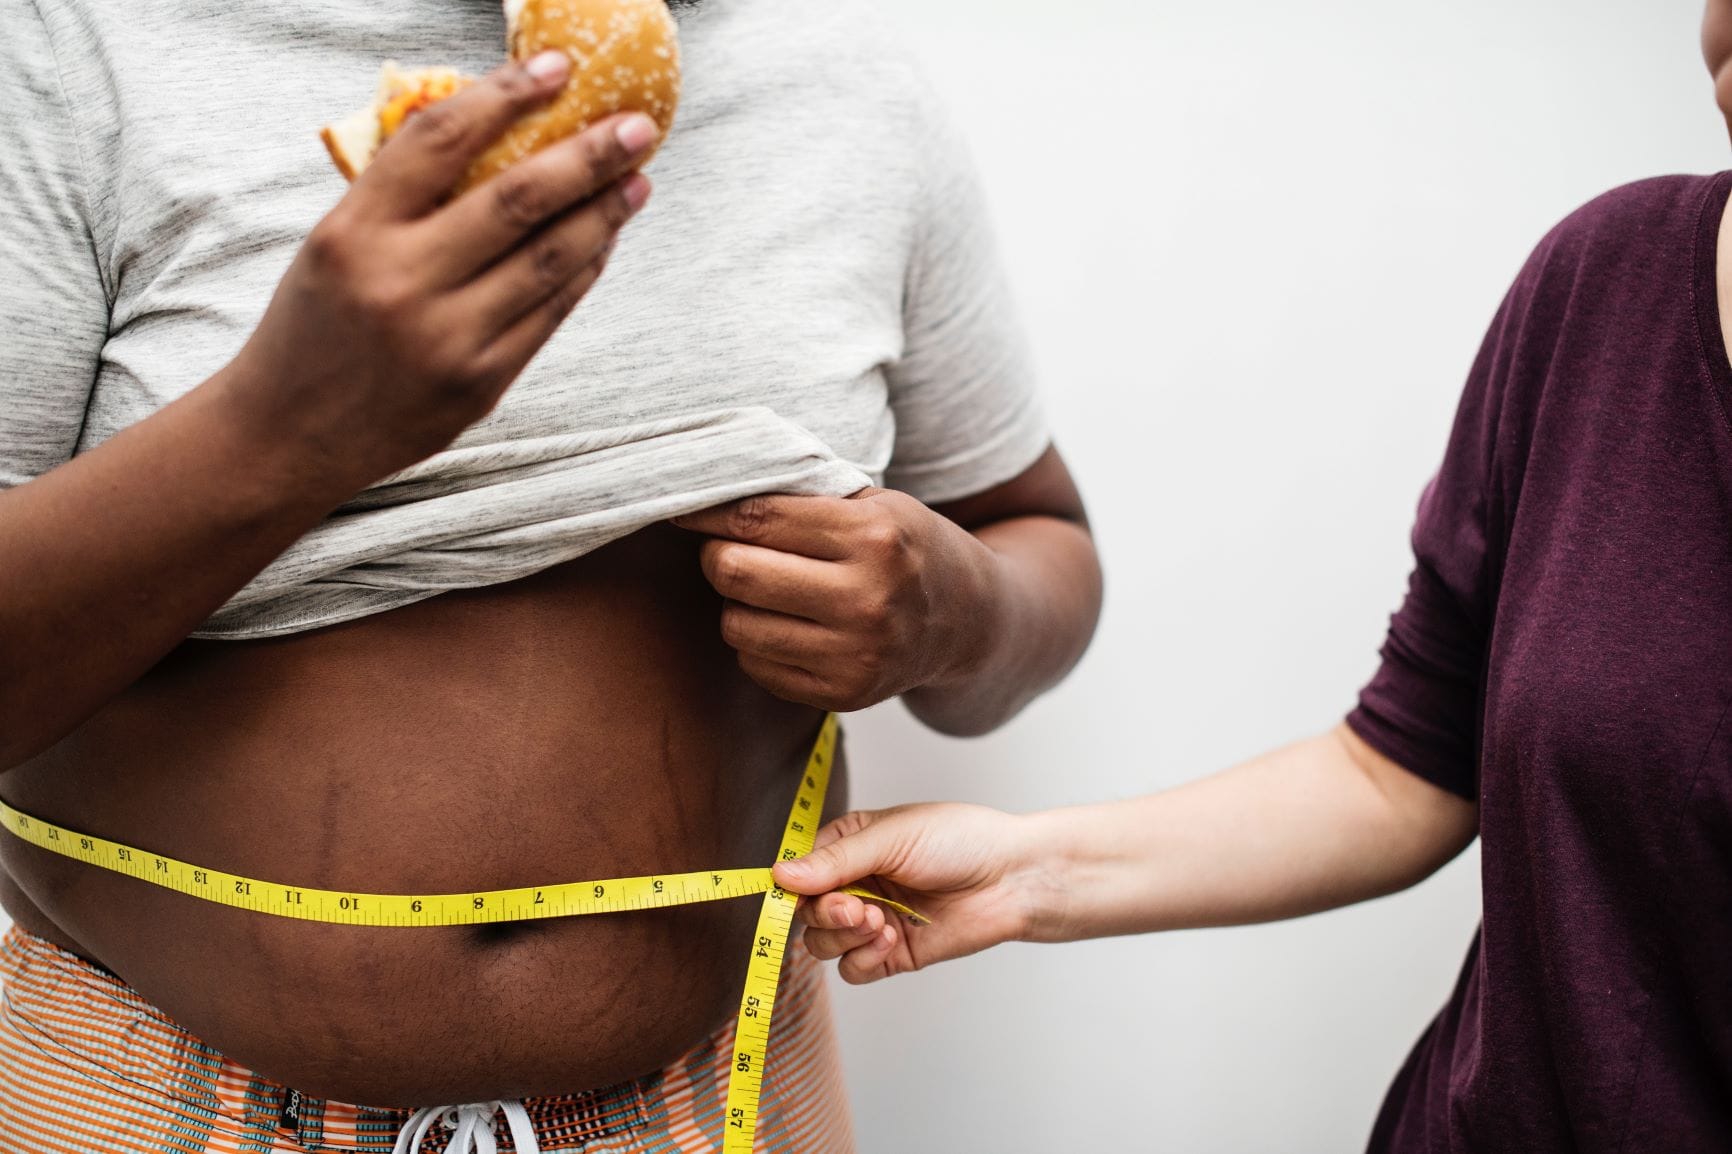 photo of person eating while a doctor measures their stomach with a tape measure